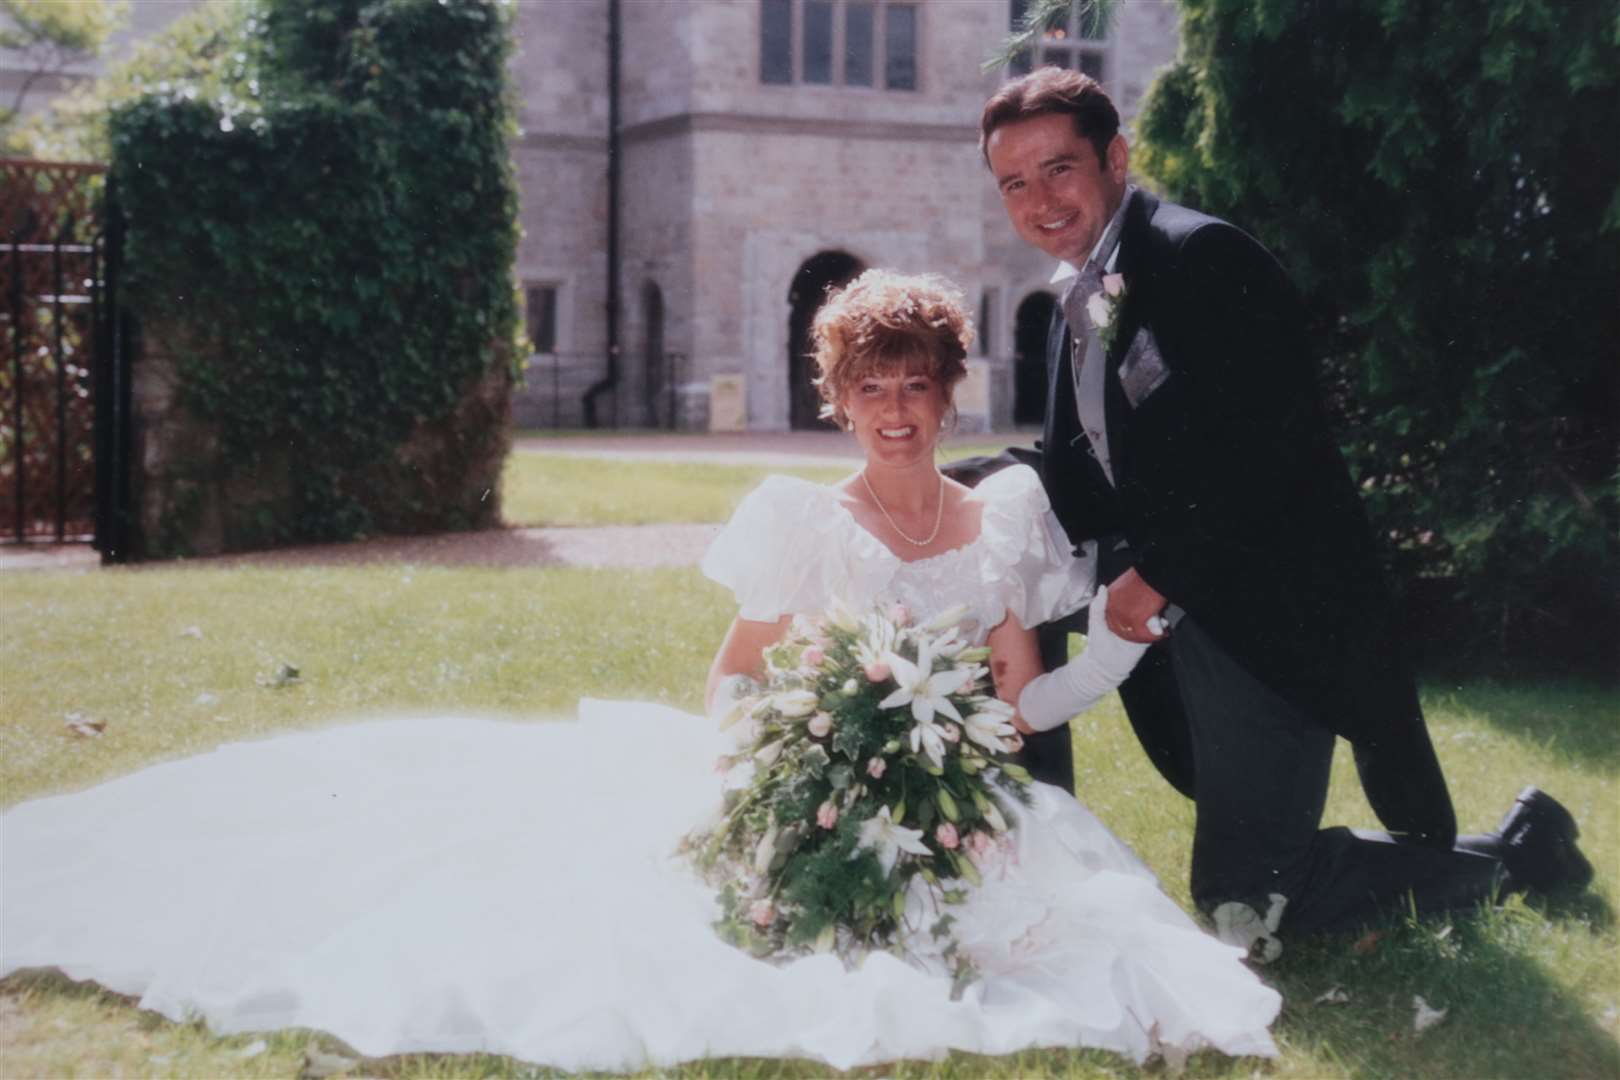 Nicky and Antony at their wedding in 1993